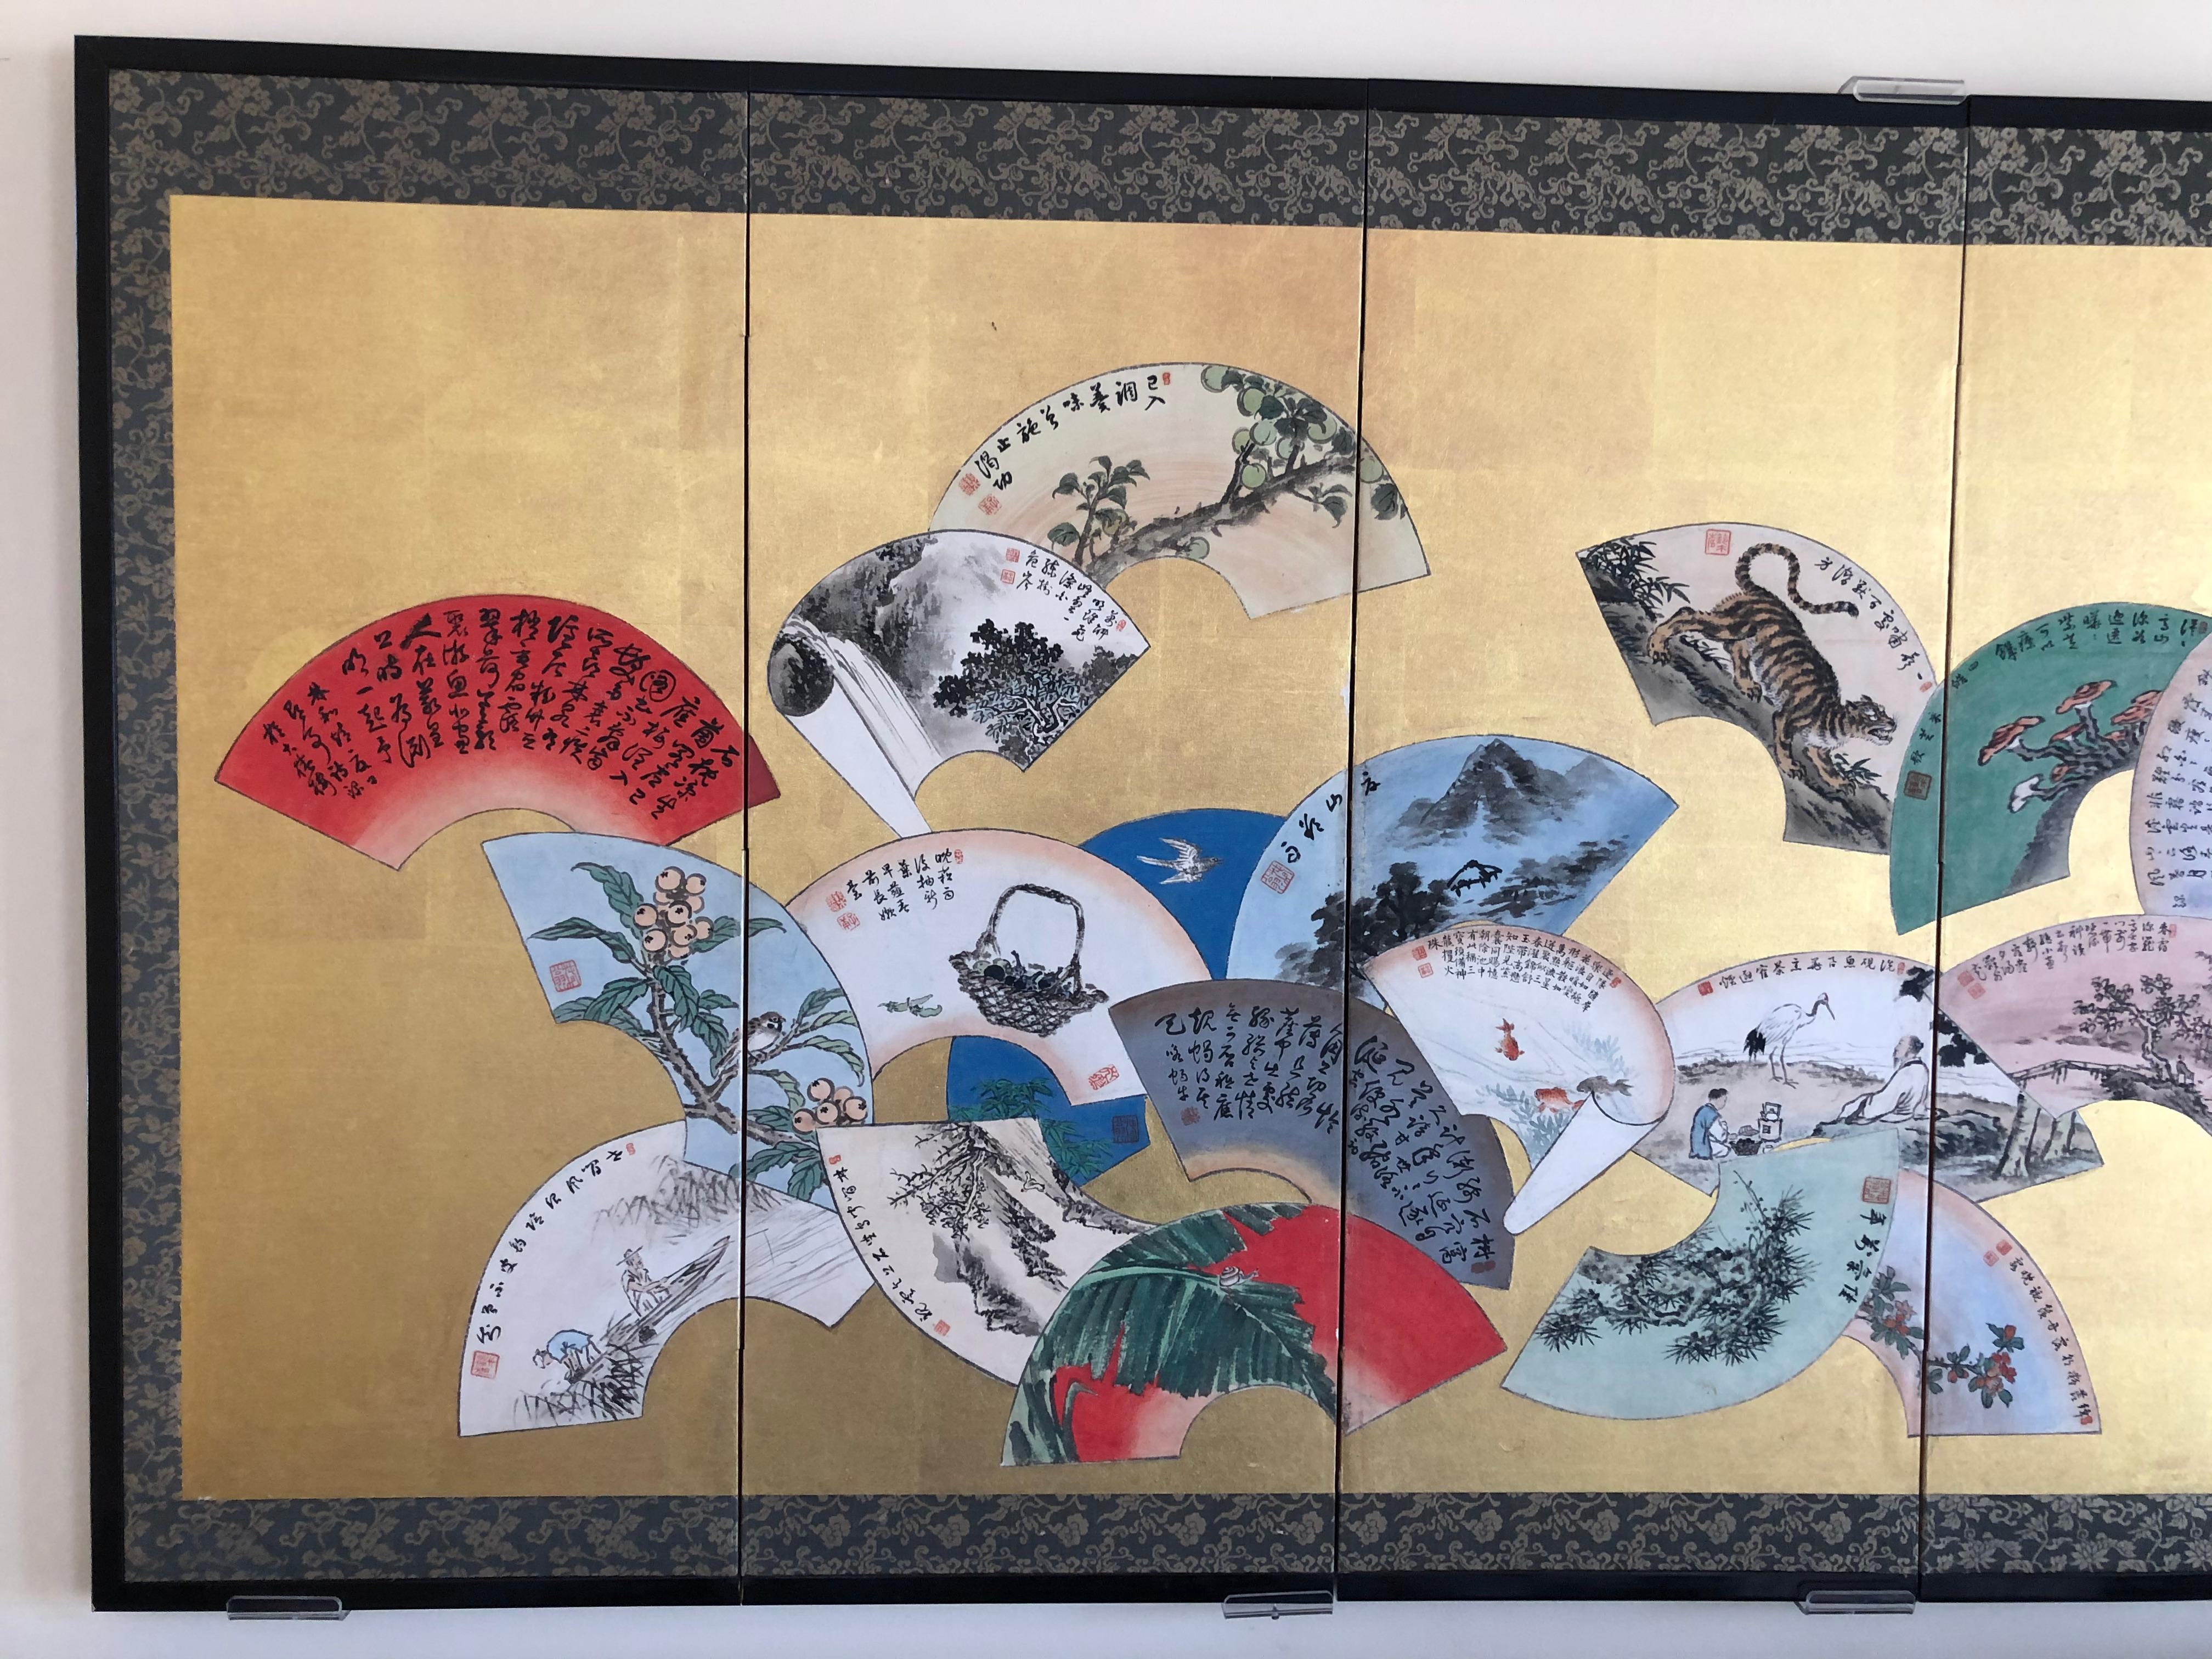 A fine early small scale Japanese hand-painted six-panel folding screen byobu conceived in a unique 